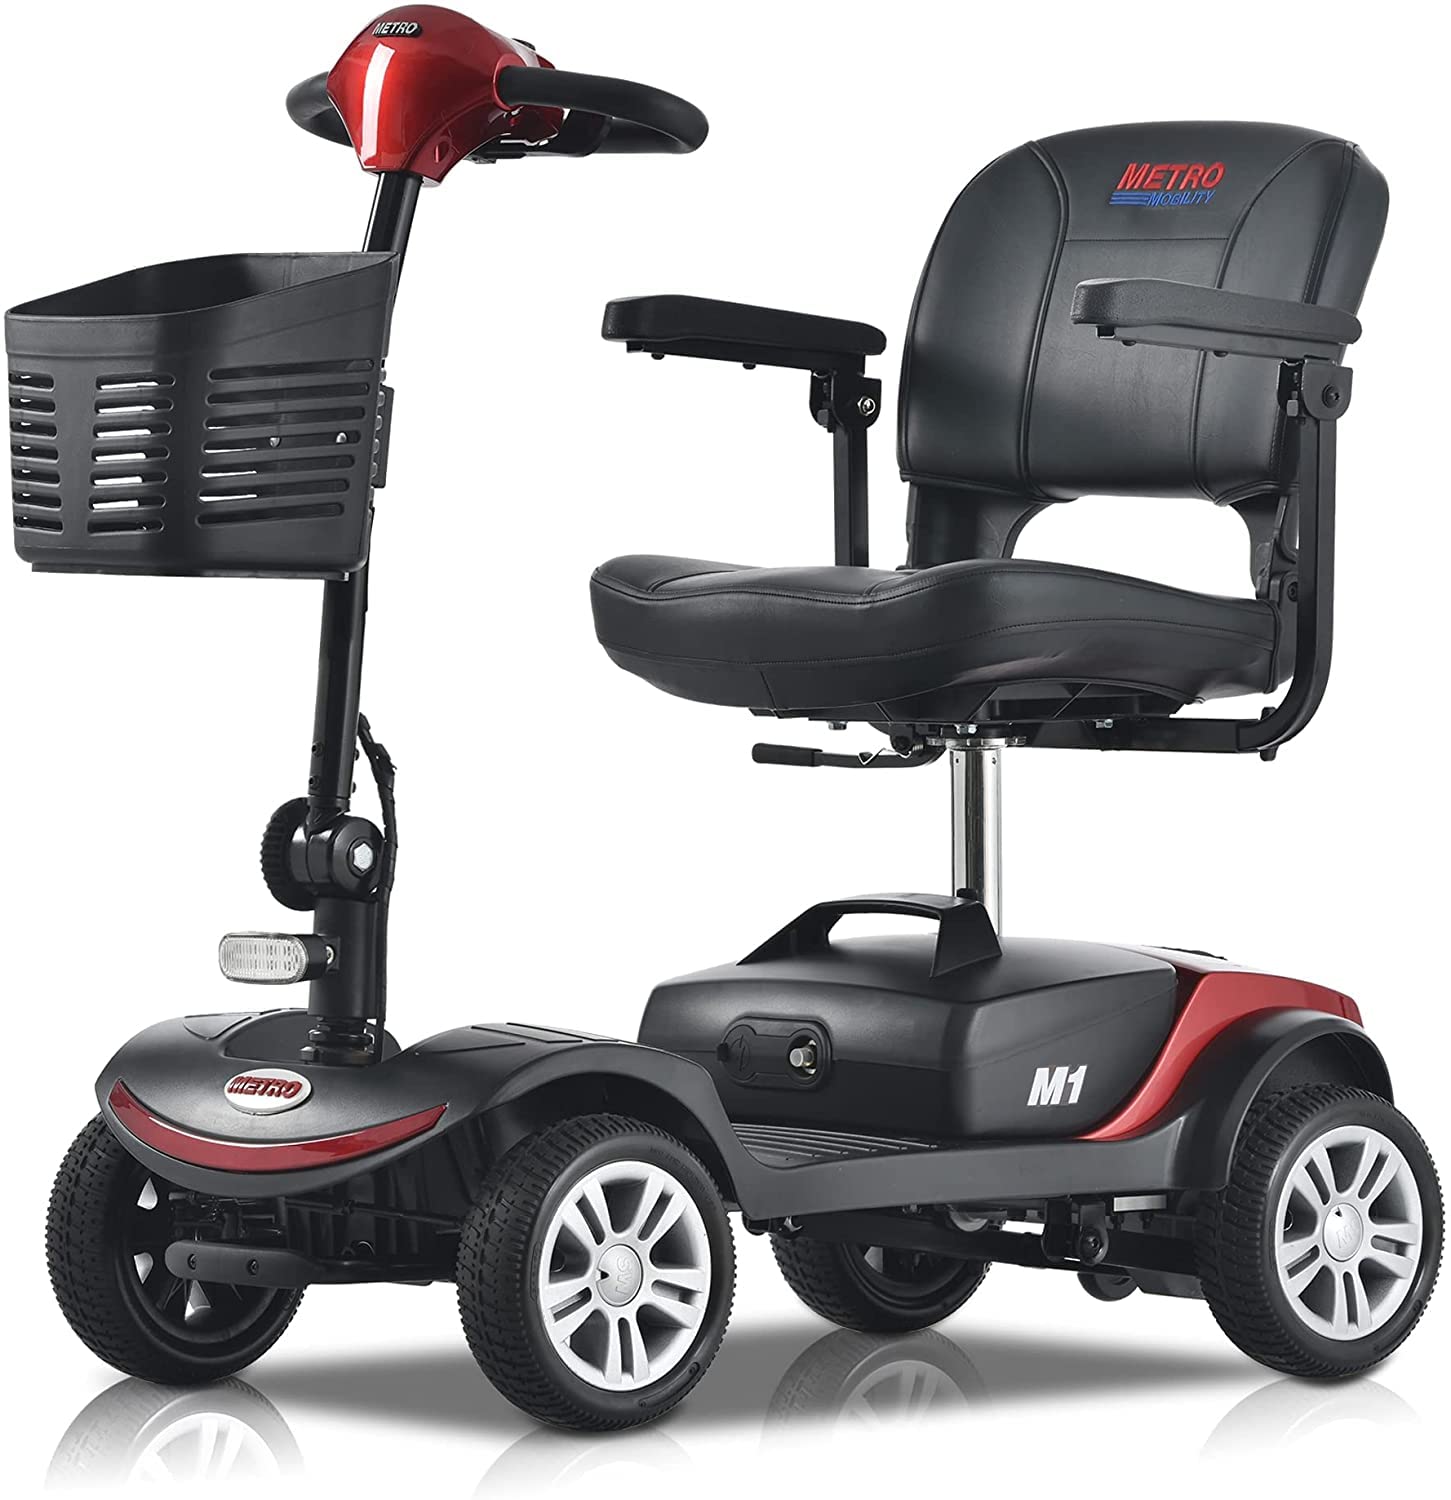 Shop all 4 wheel mobility scooters for sale from Top Mobility.